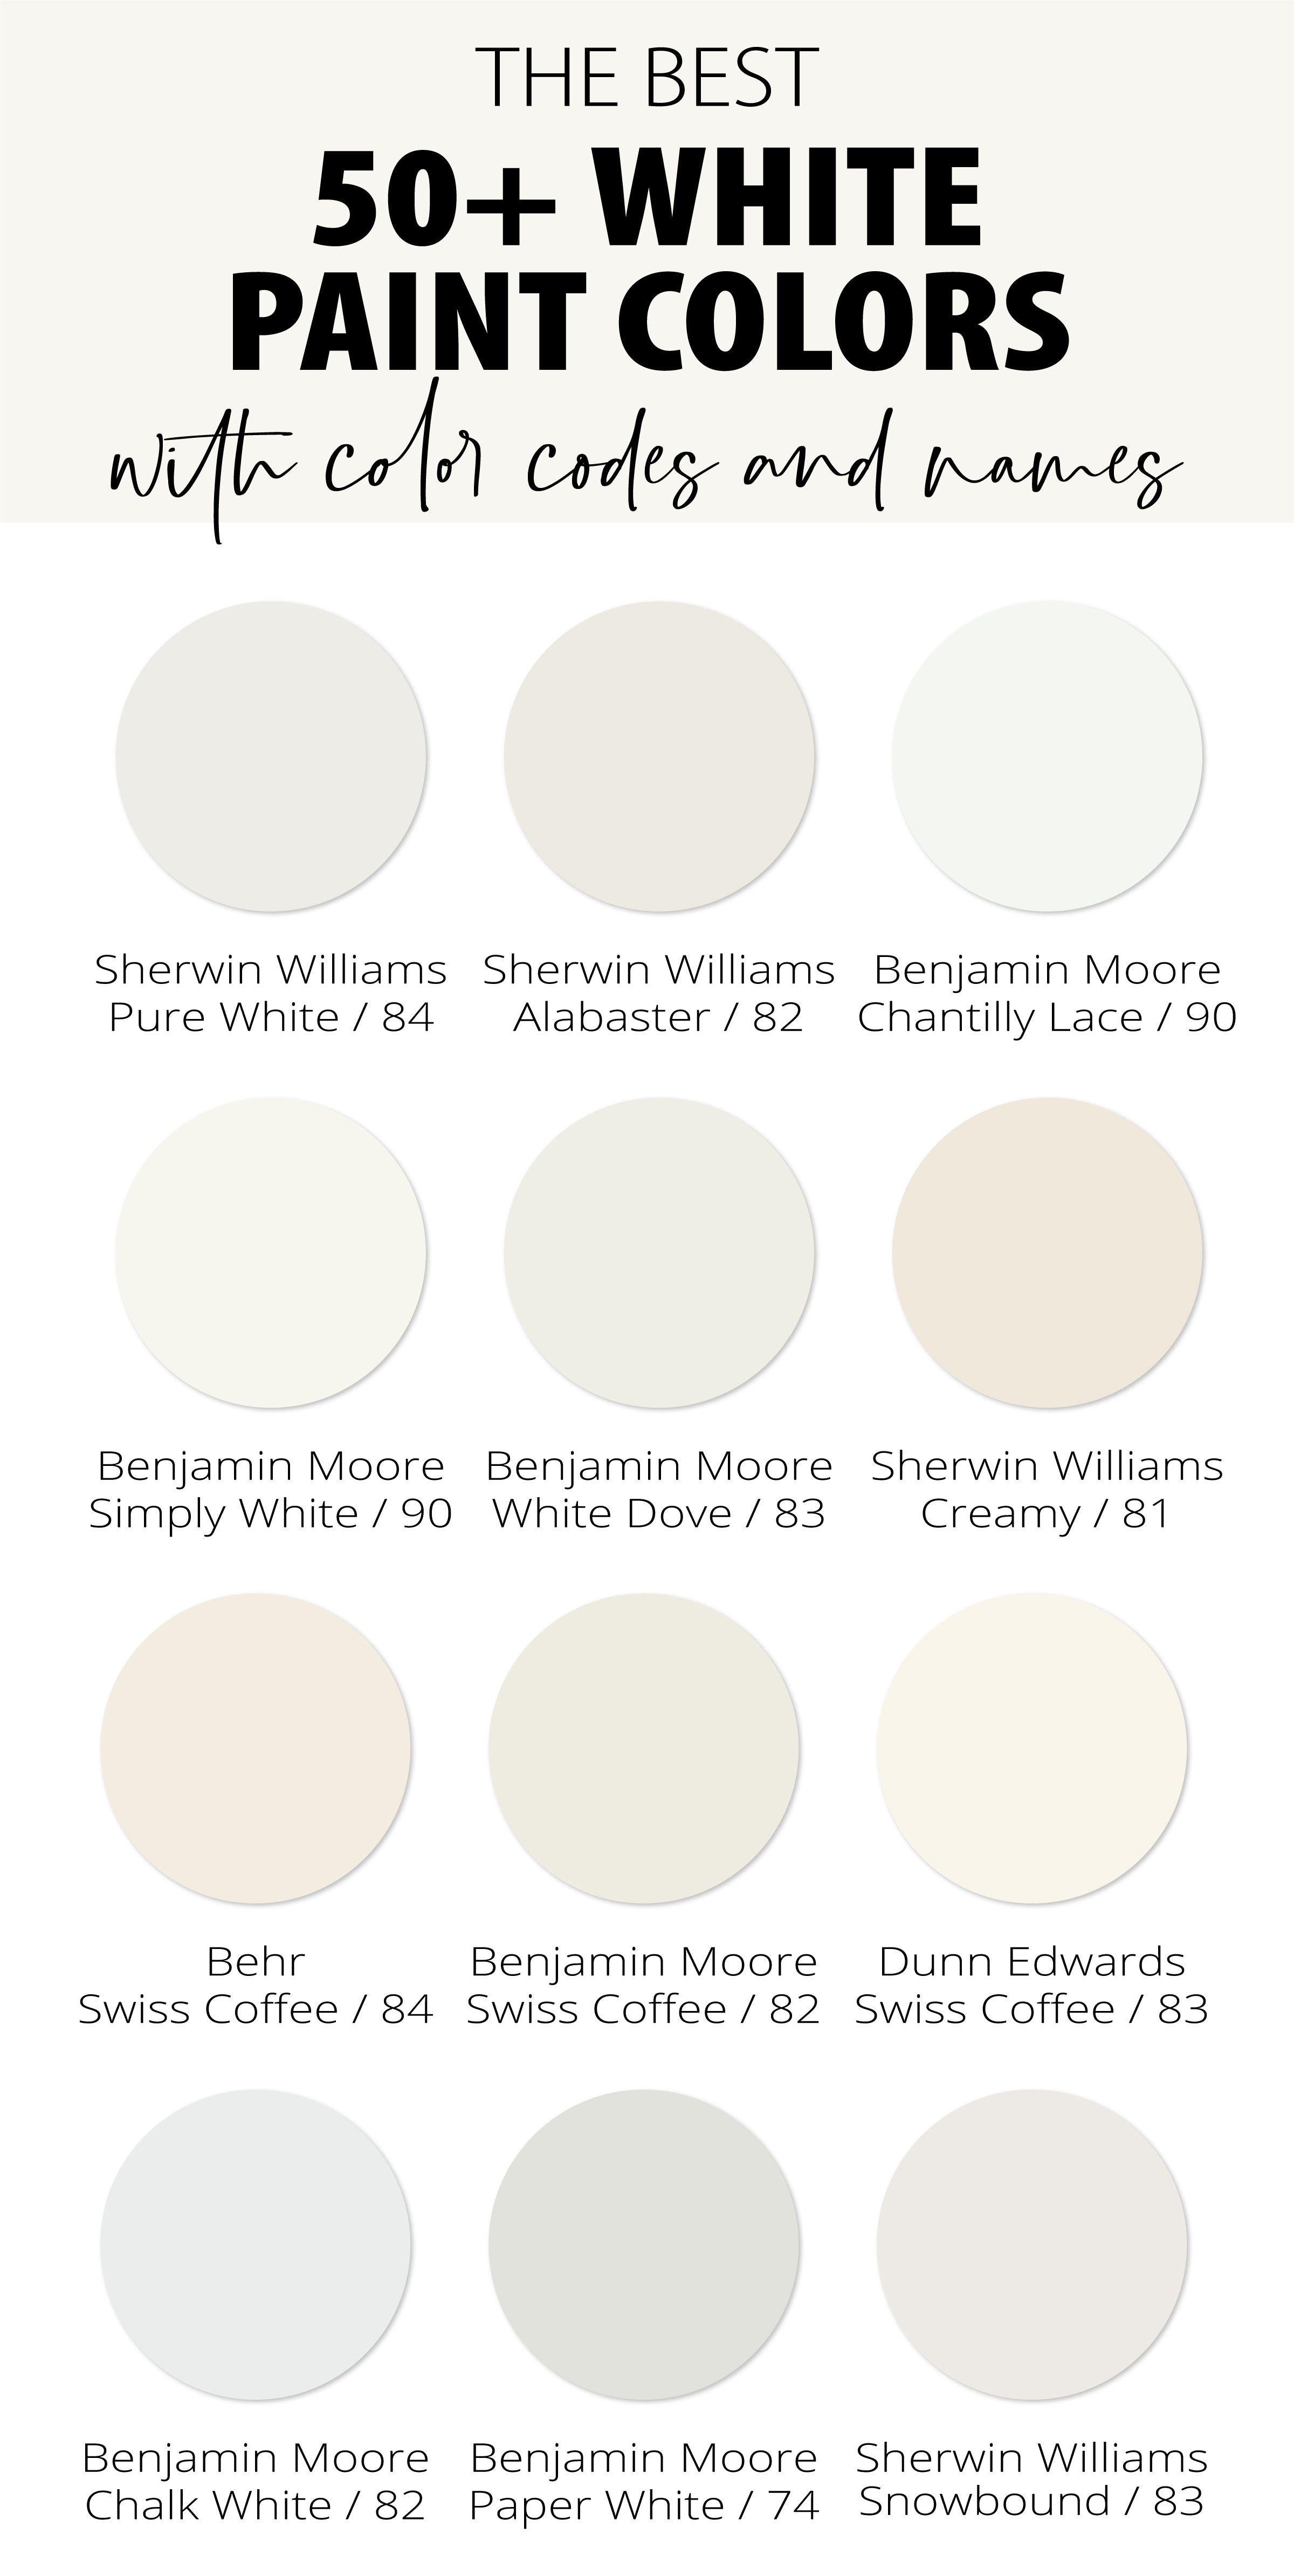 Best-White-Paint-Colors-with-Names-Colors-and-LRV-values-Pinterest-Tall